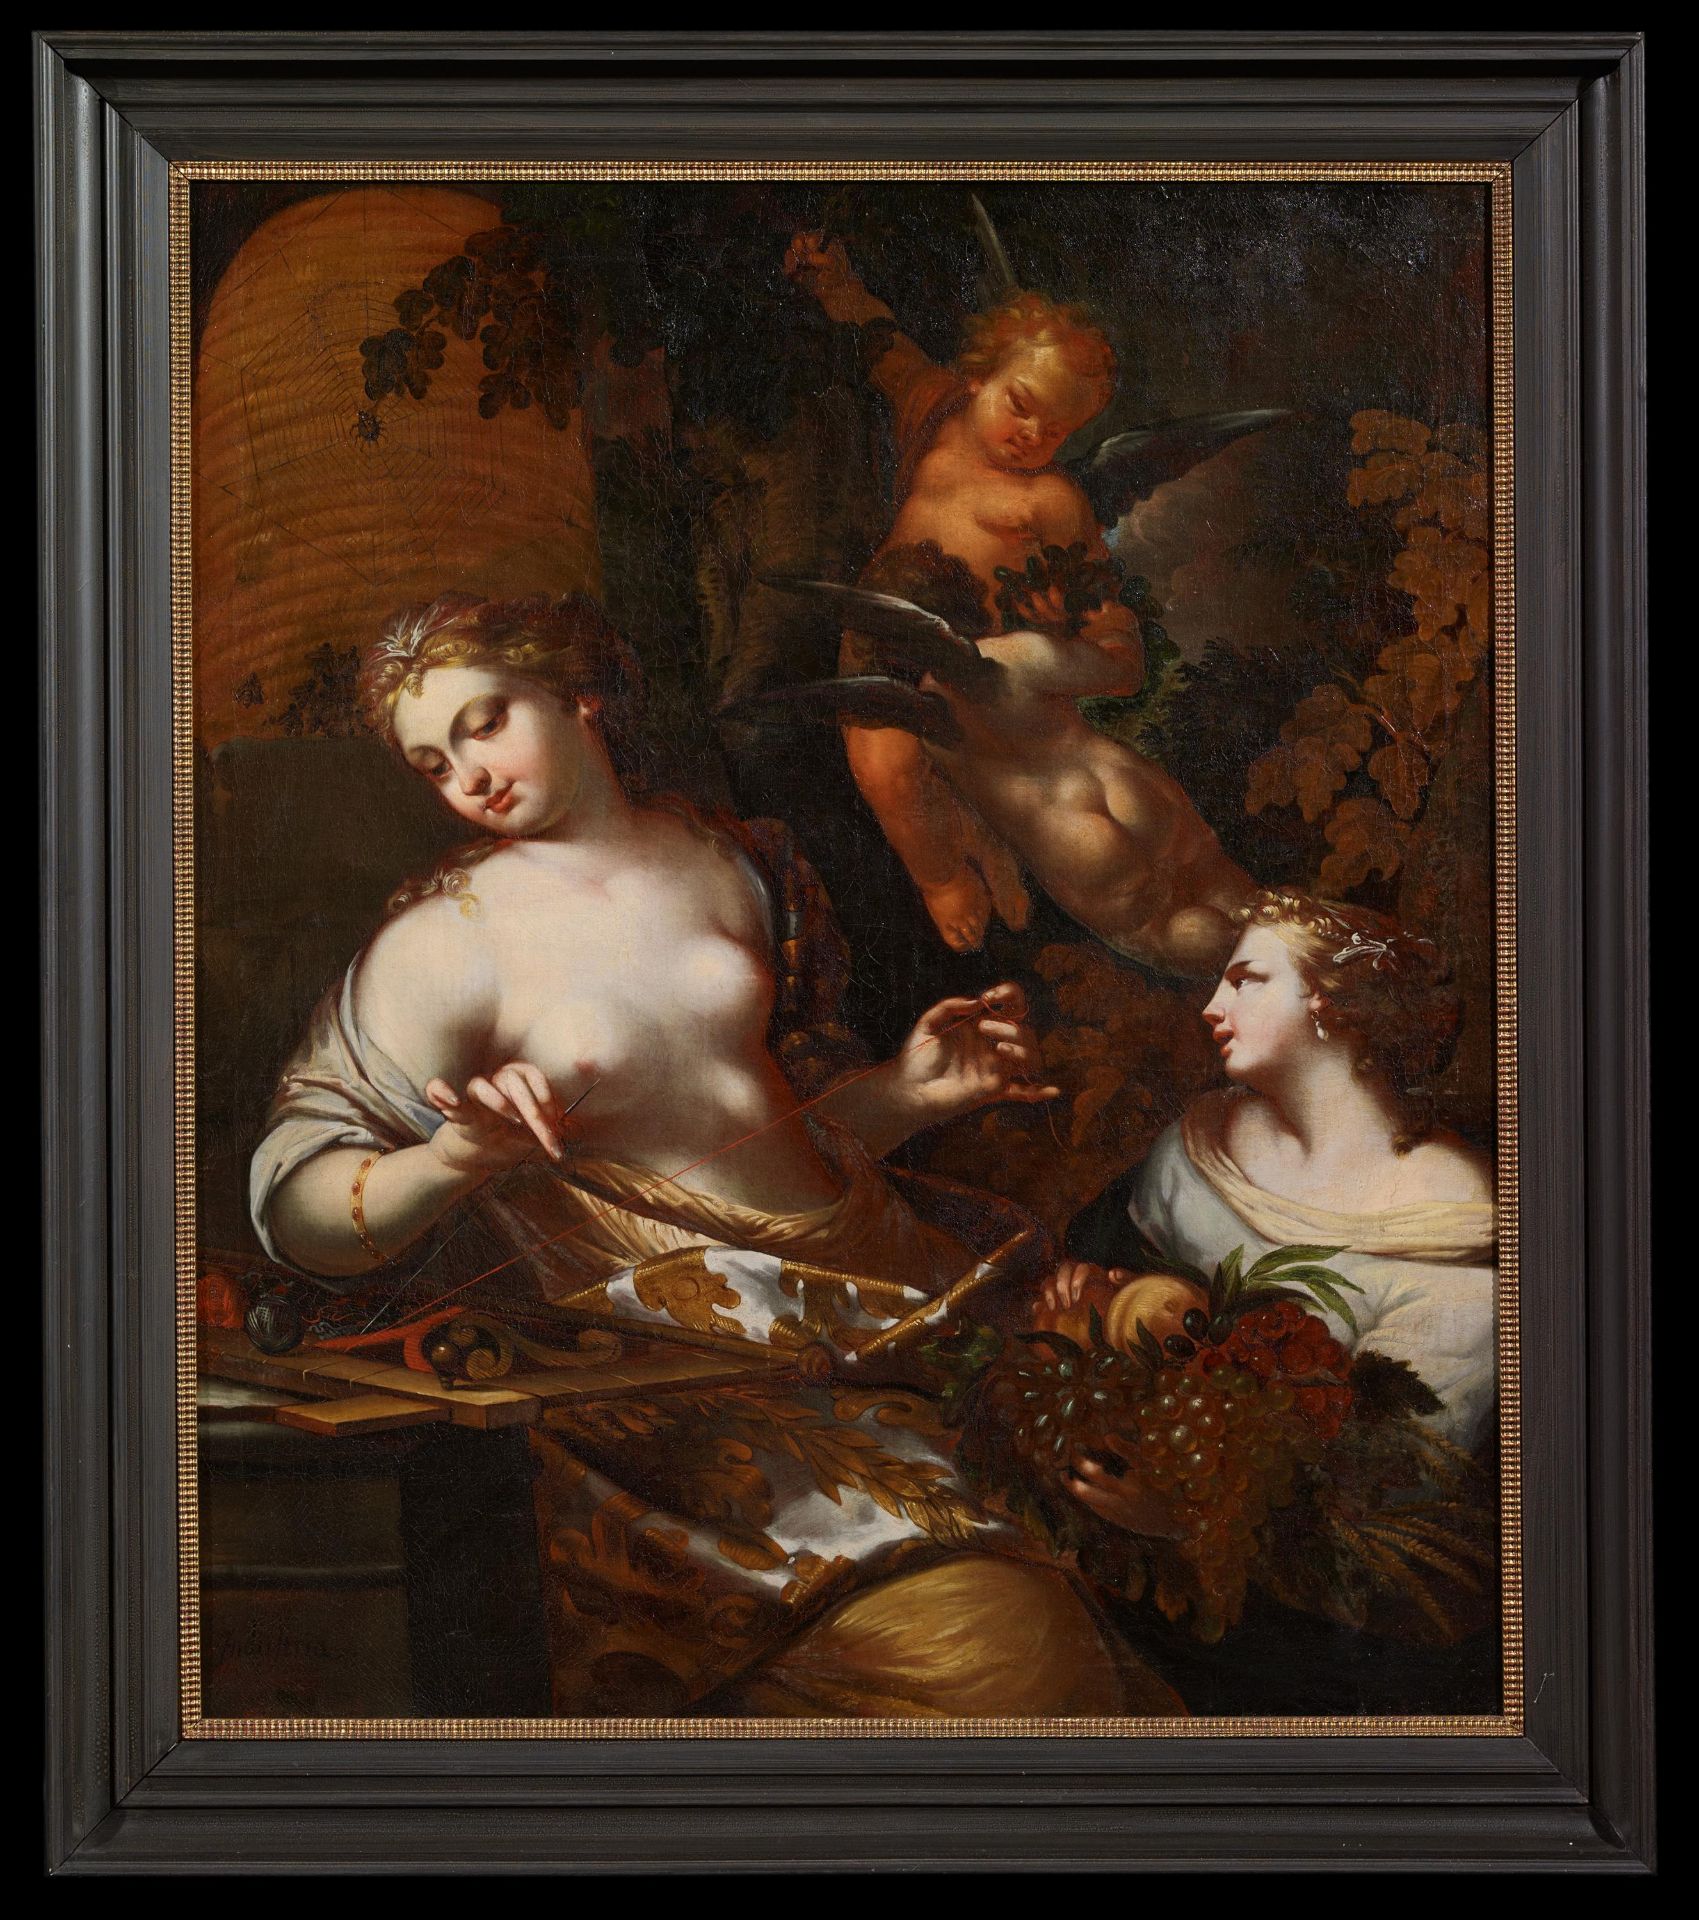 GERMAN MASTERca. 1700Title: "Industria". Allegory of Diligence. Technique: Oil on canvas. - Image 2 of 4